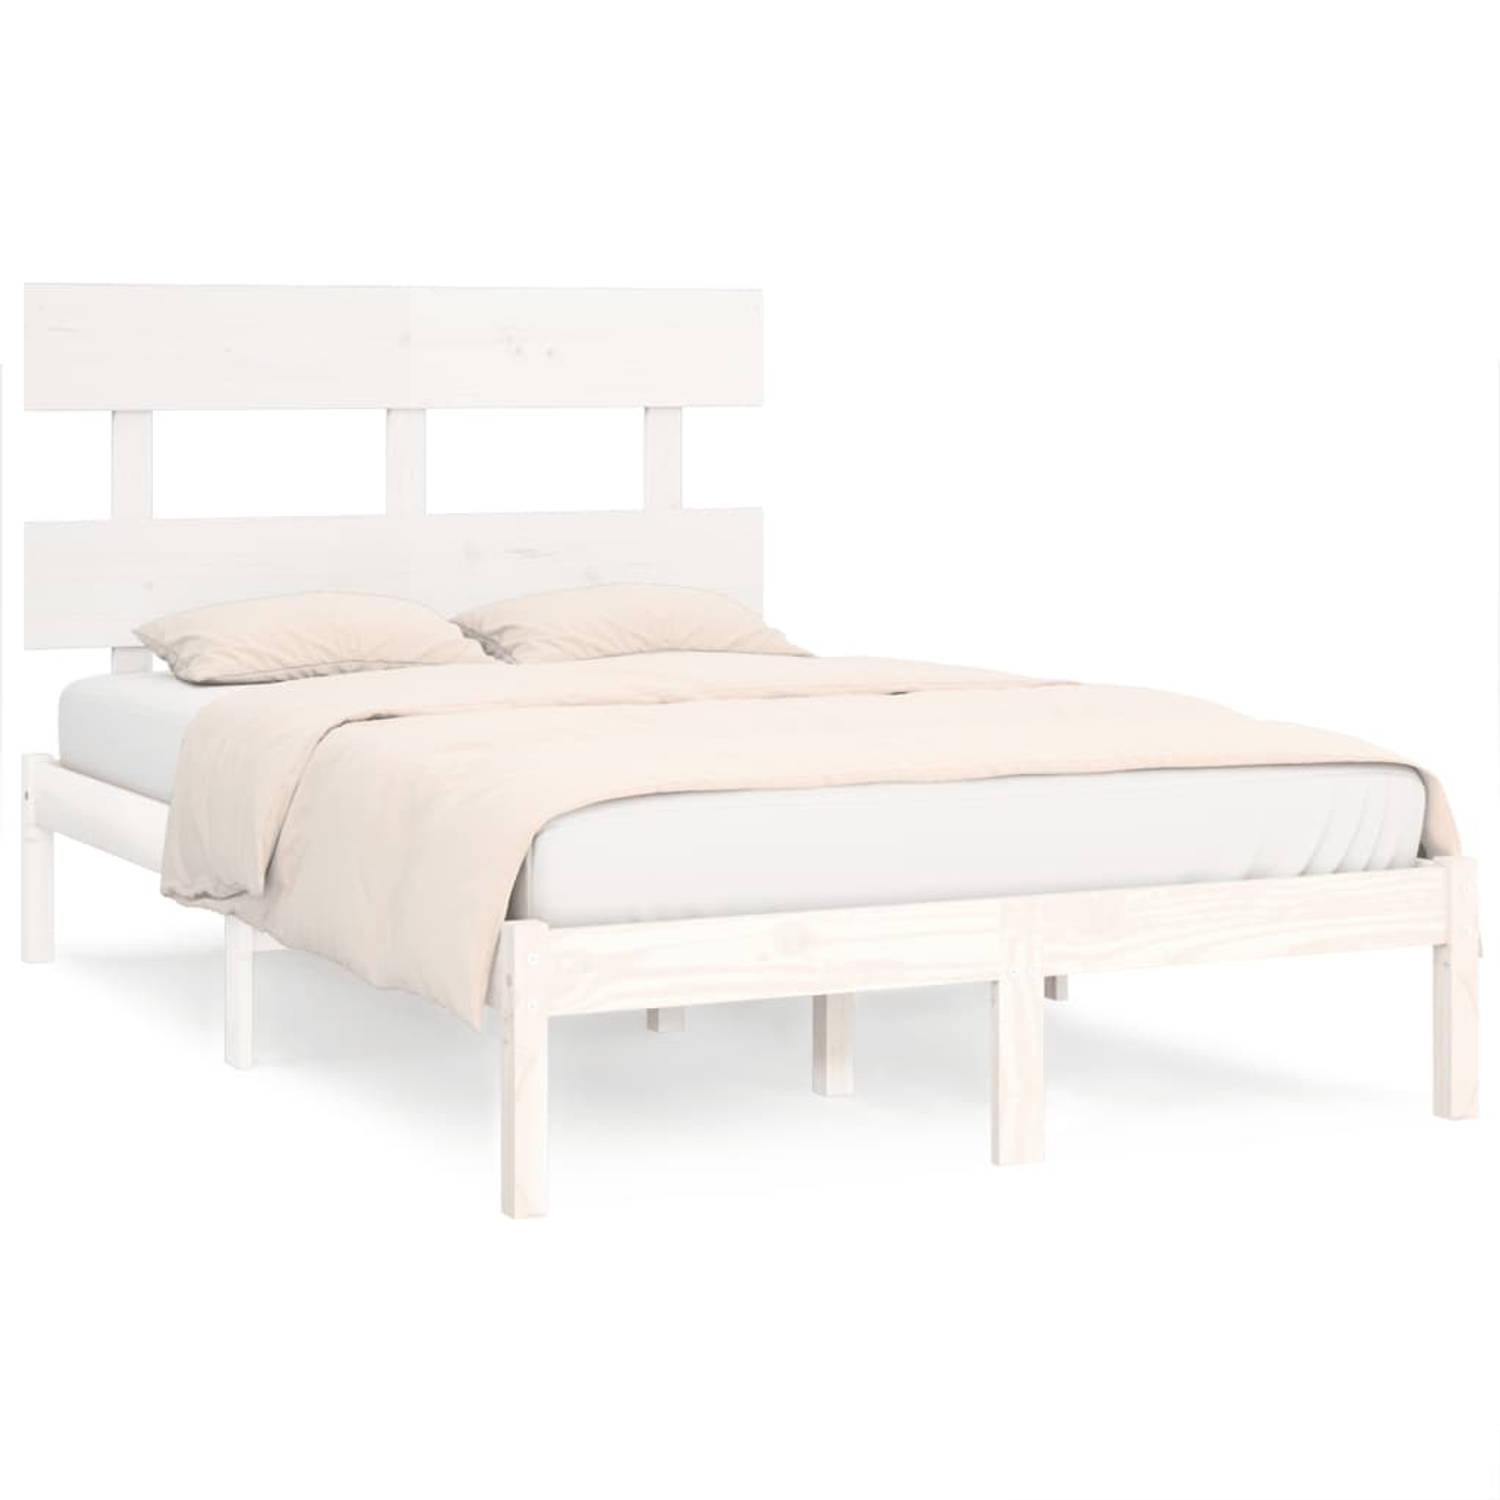 The Living Store Bedframe massief hout wit 160x200 cm - Bedframe - Bedframes - Tweepersoonsbed - Bed - Bedombouw - Dubbel Bed - Frame - Bed Frame - Ledikant - Bedframe Met Hoofdein